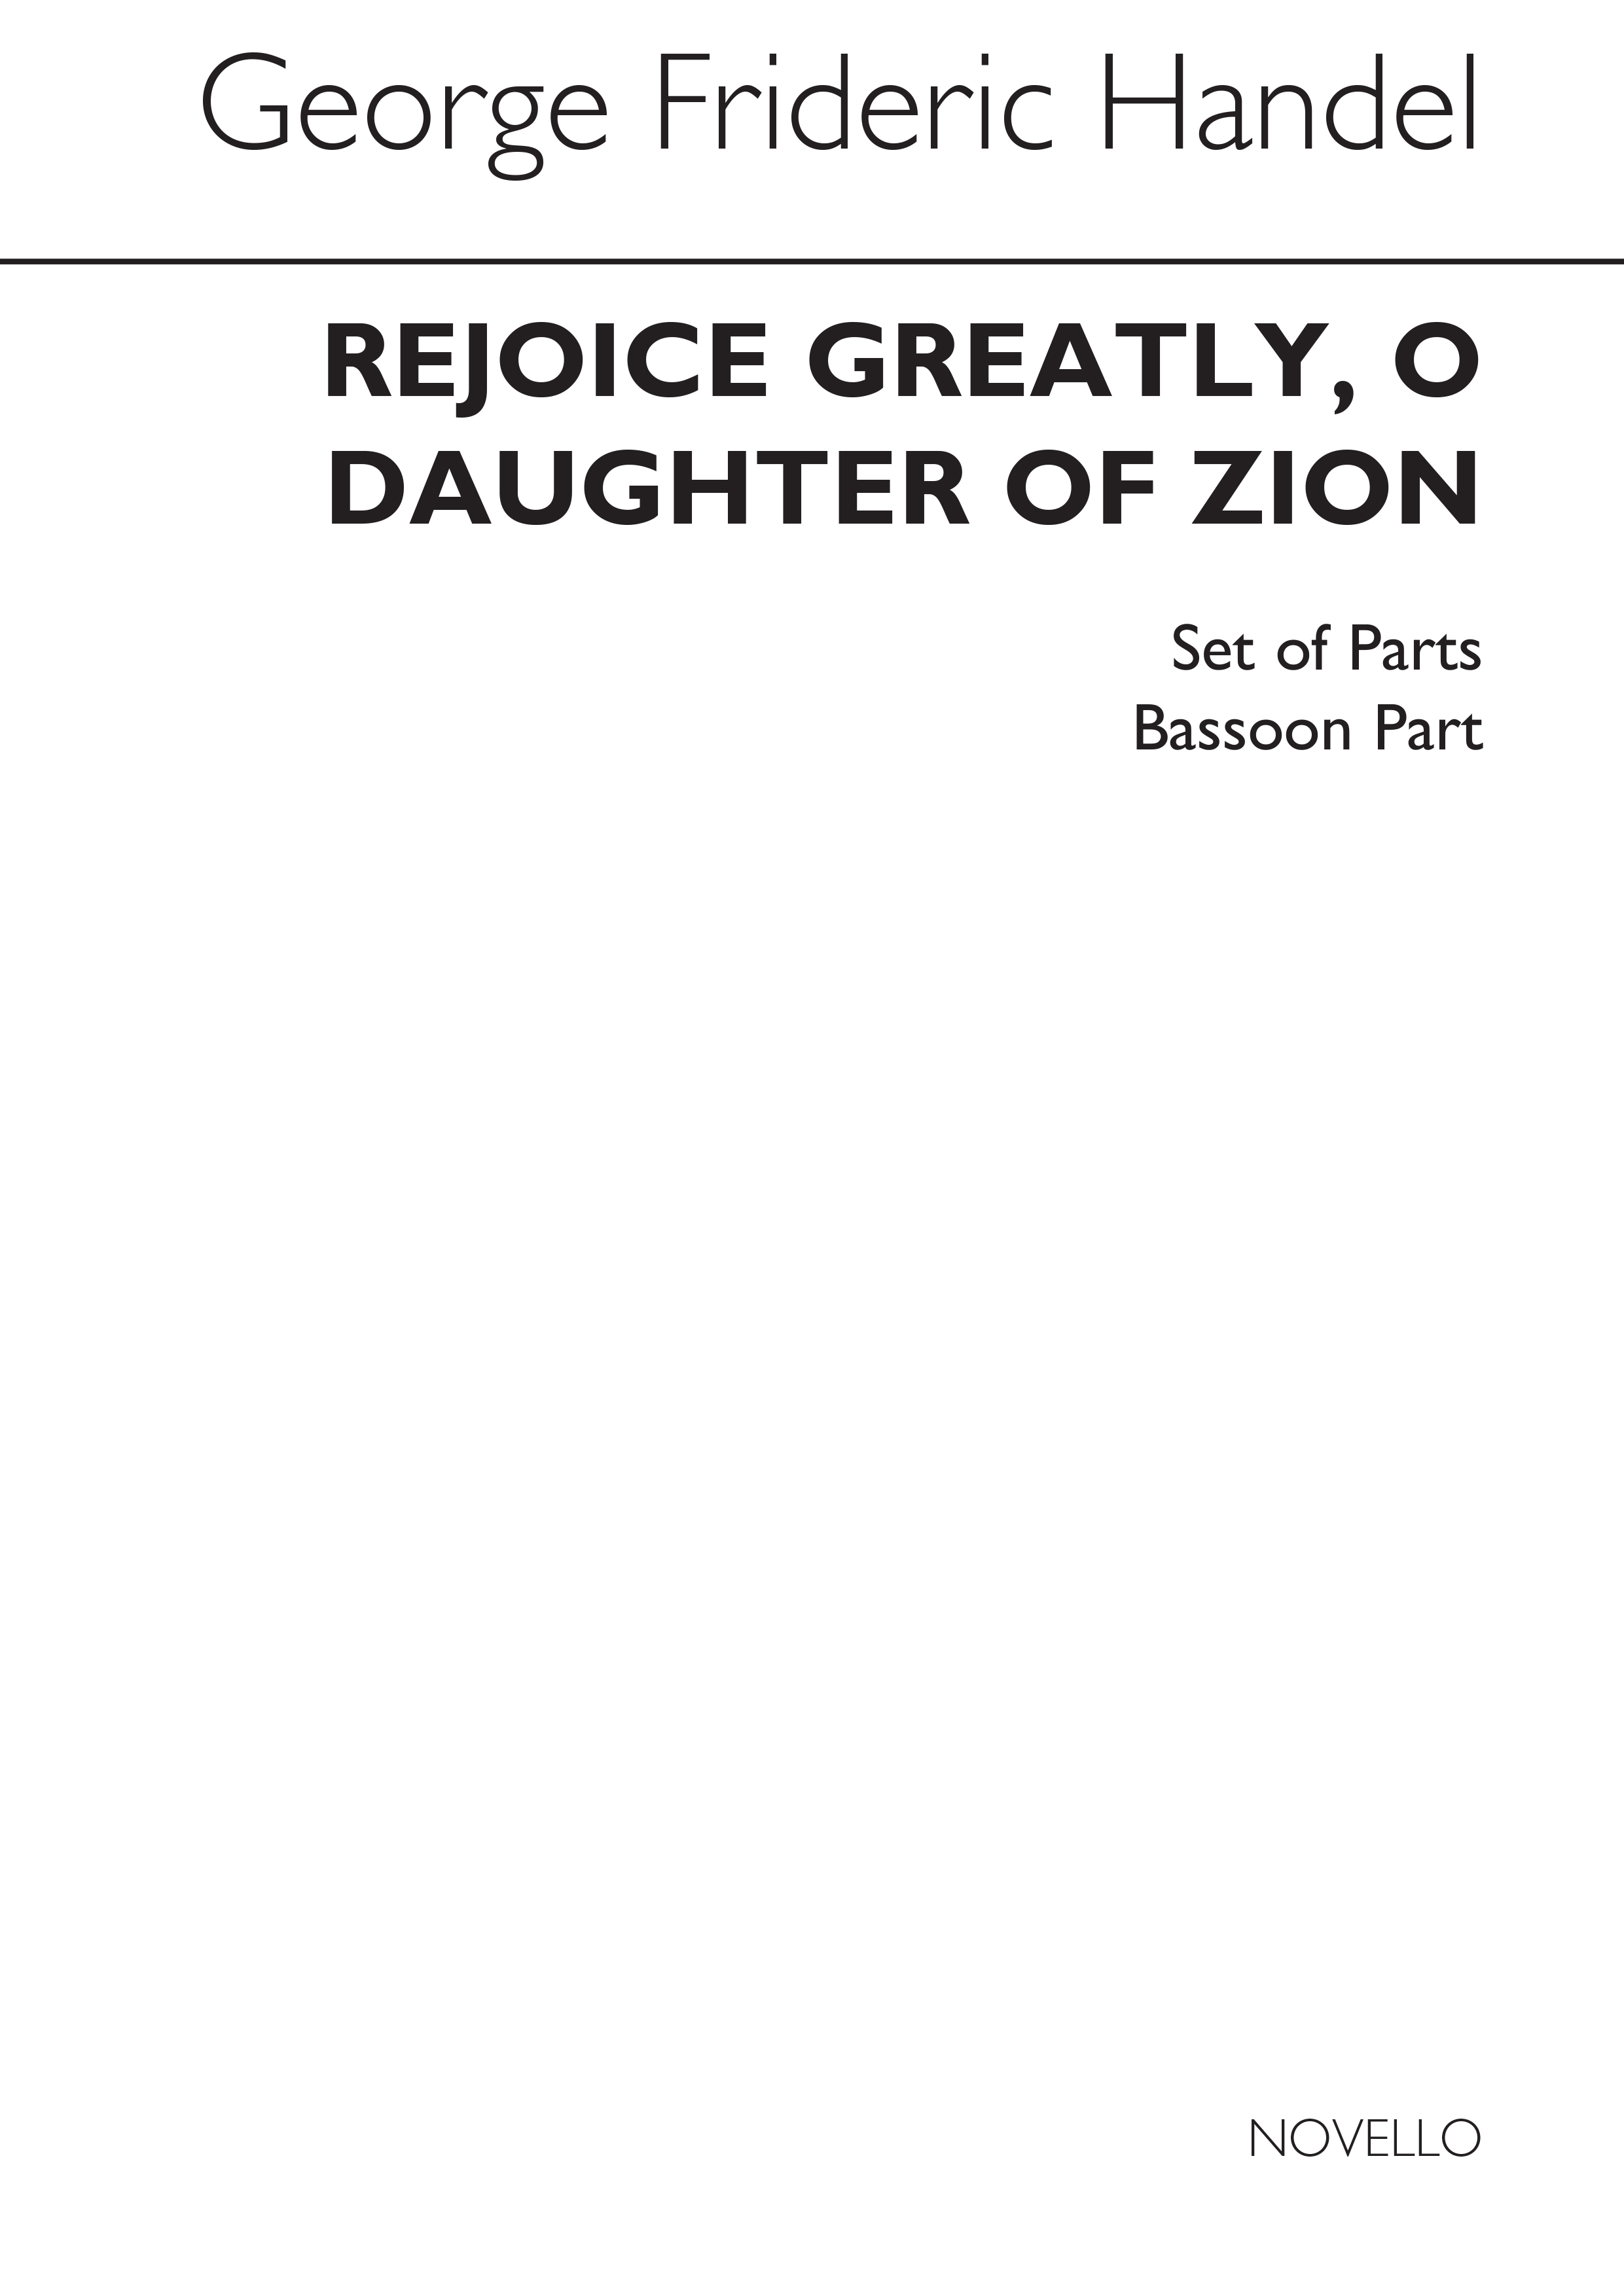 G.F. Handel: Rejoice Greatly, O Daughter Of Zion (12/8) - Accompaniment Parts